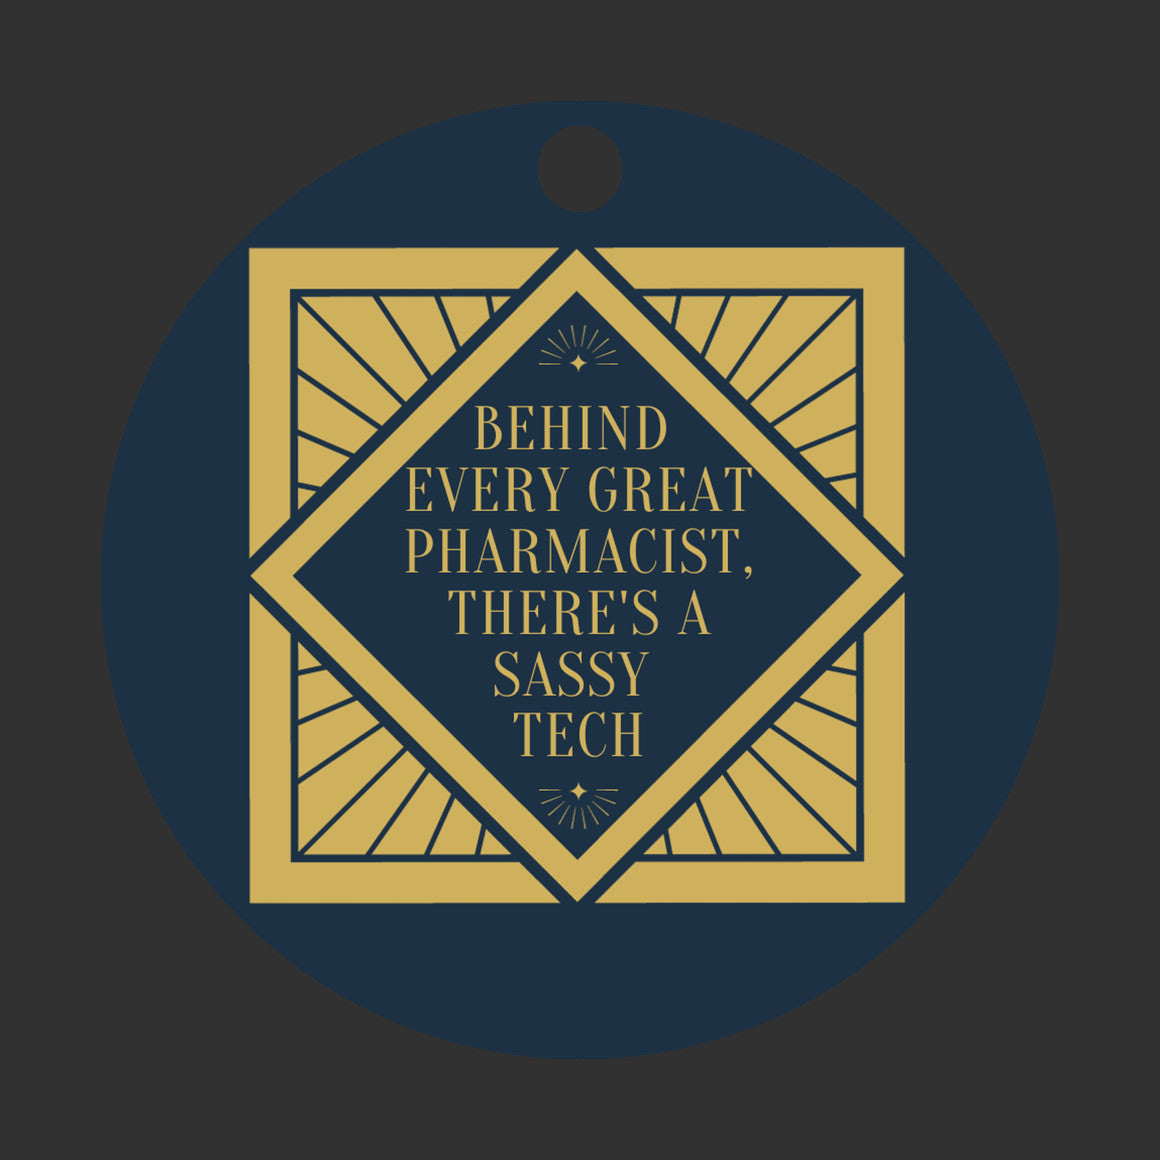 Pharmacist Tech 1/8" Ornament - FREE SHIPPING! Buy 3 Ornaments Get 10% Off, Buy 5 Ornaments Get 20% Off, Buy 10 Ornaments Get 30% Off! Discounts Applied Automatically At Checkout